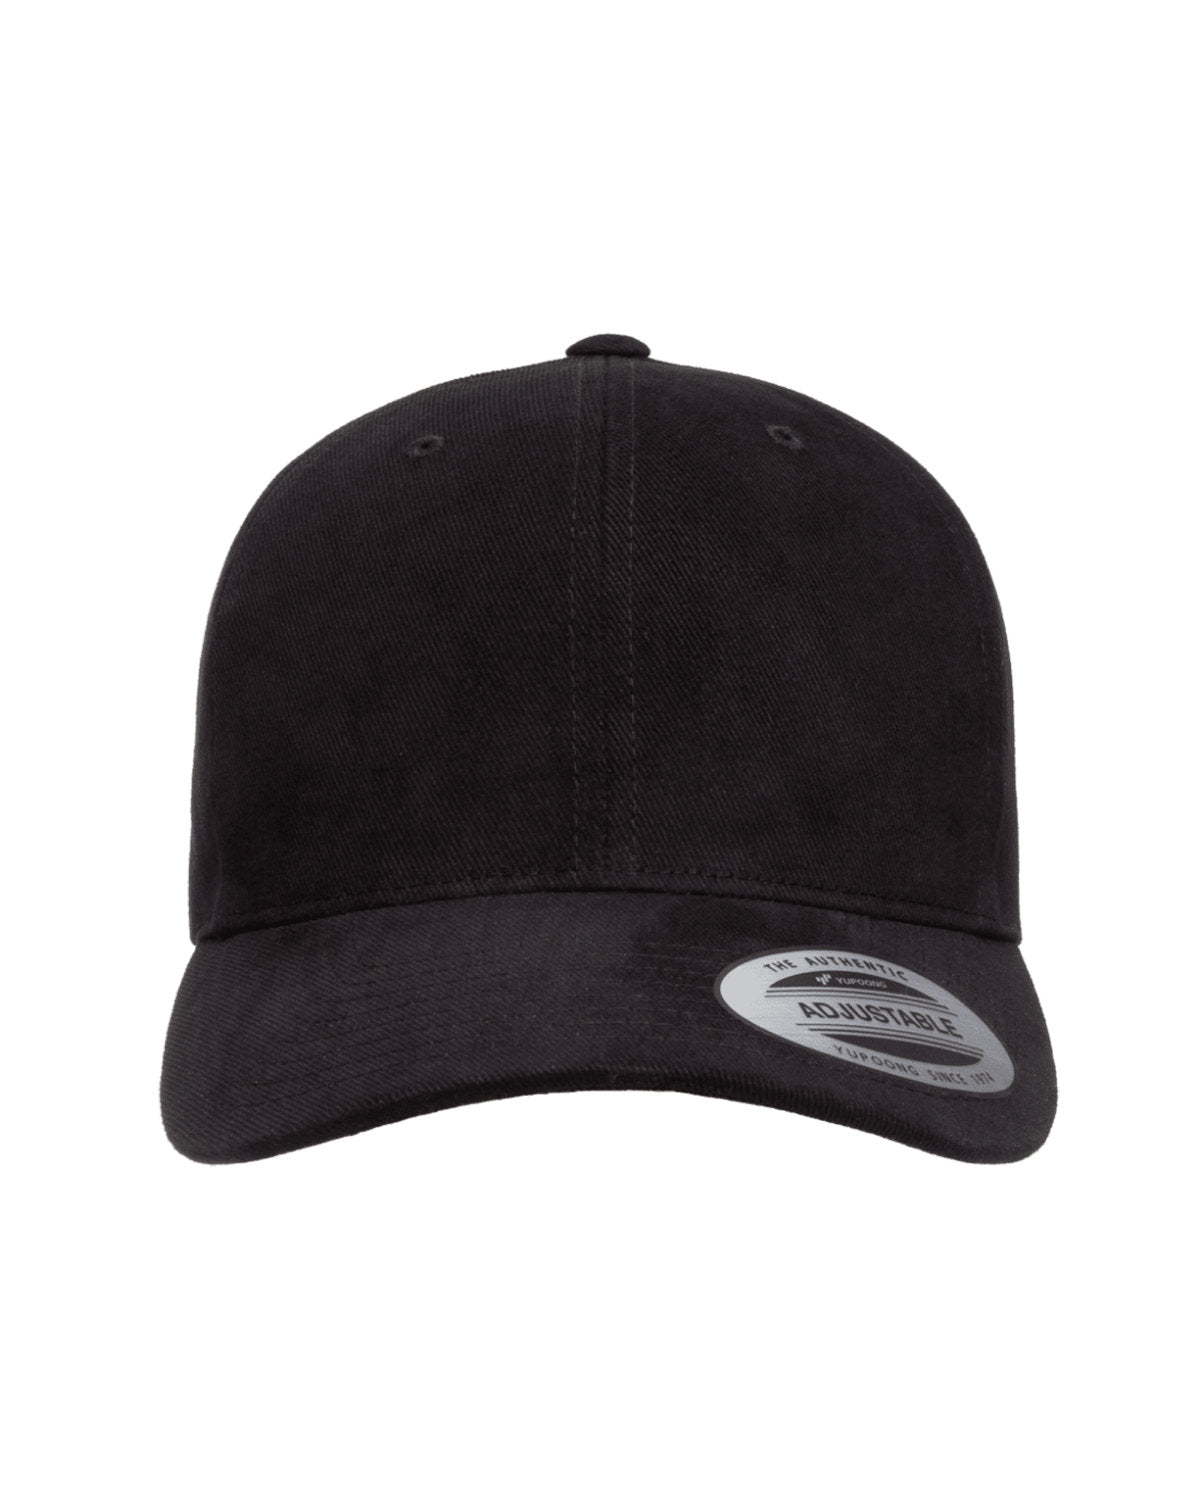 Yupoong Adult Brushed Cotton Twill Mid-Profile Cap